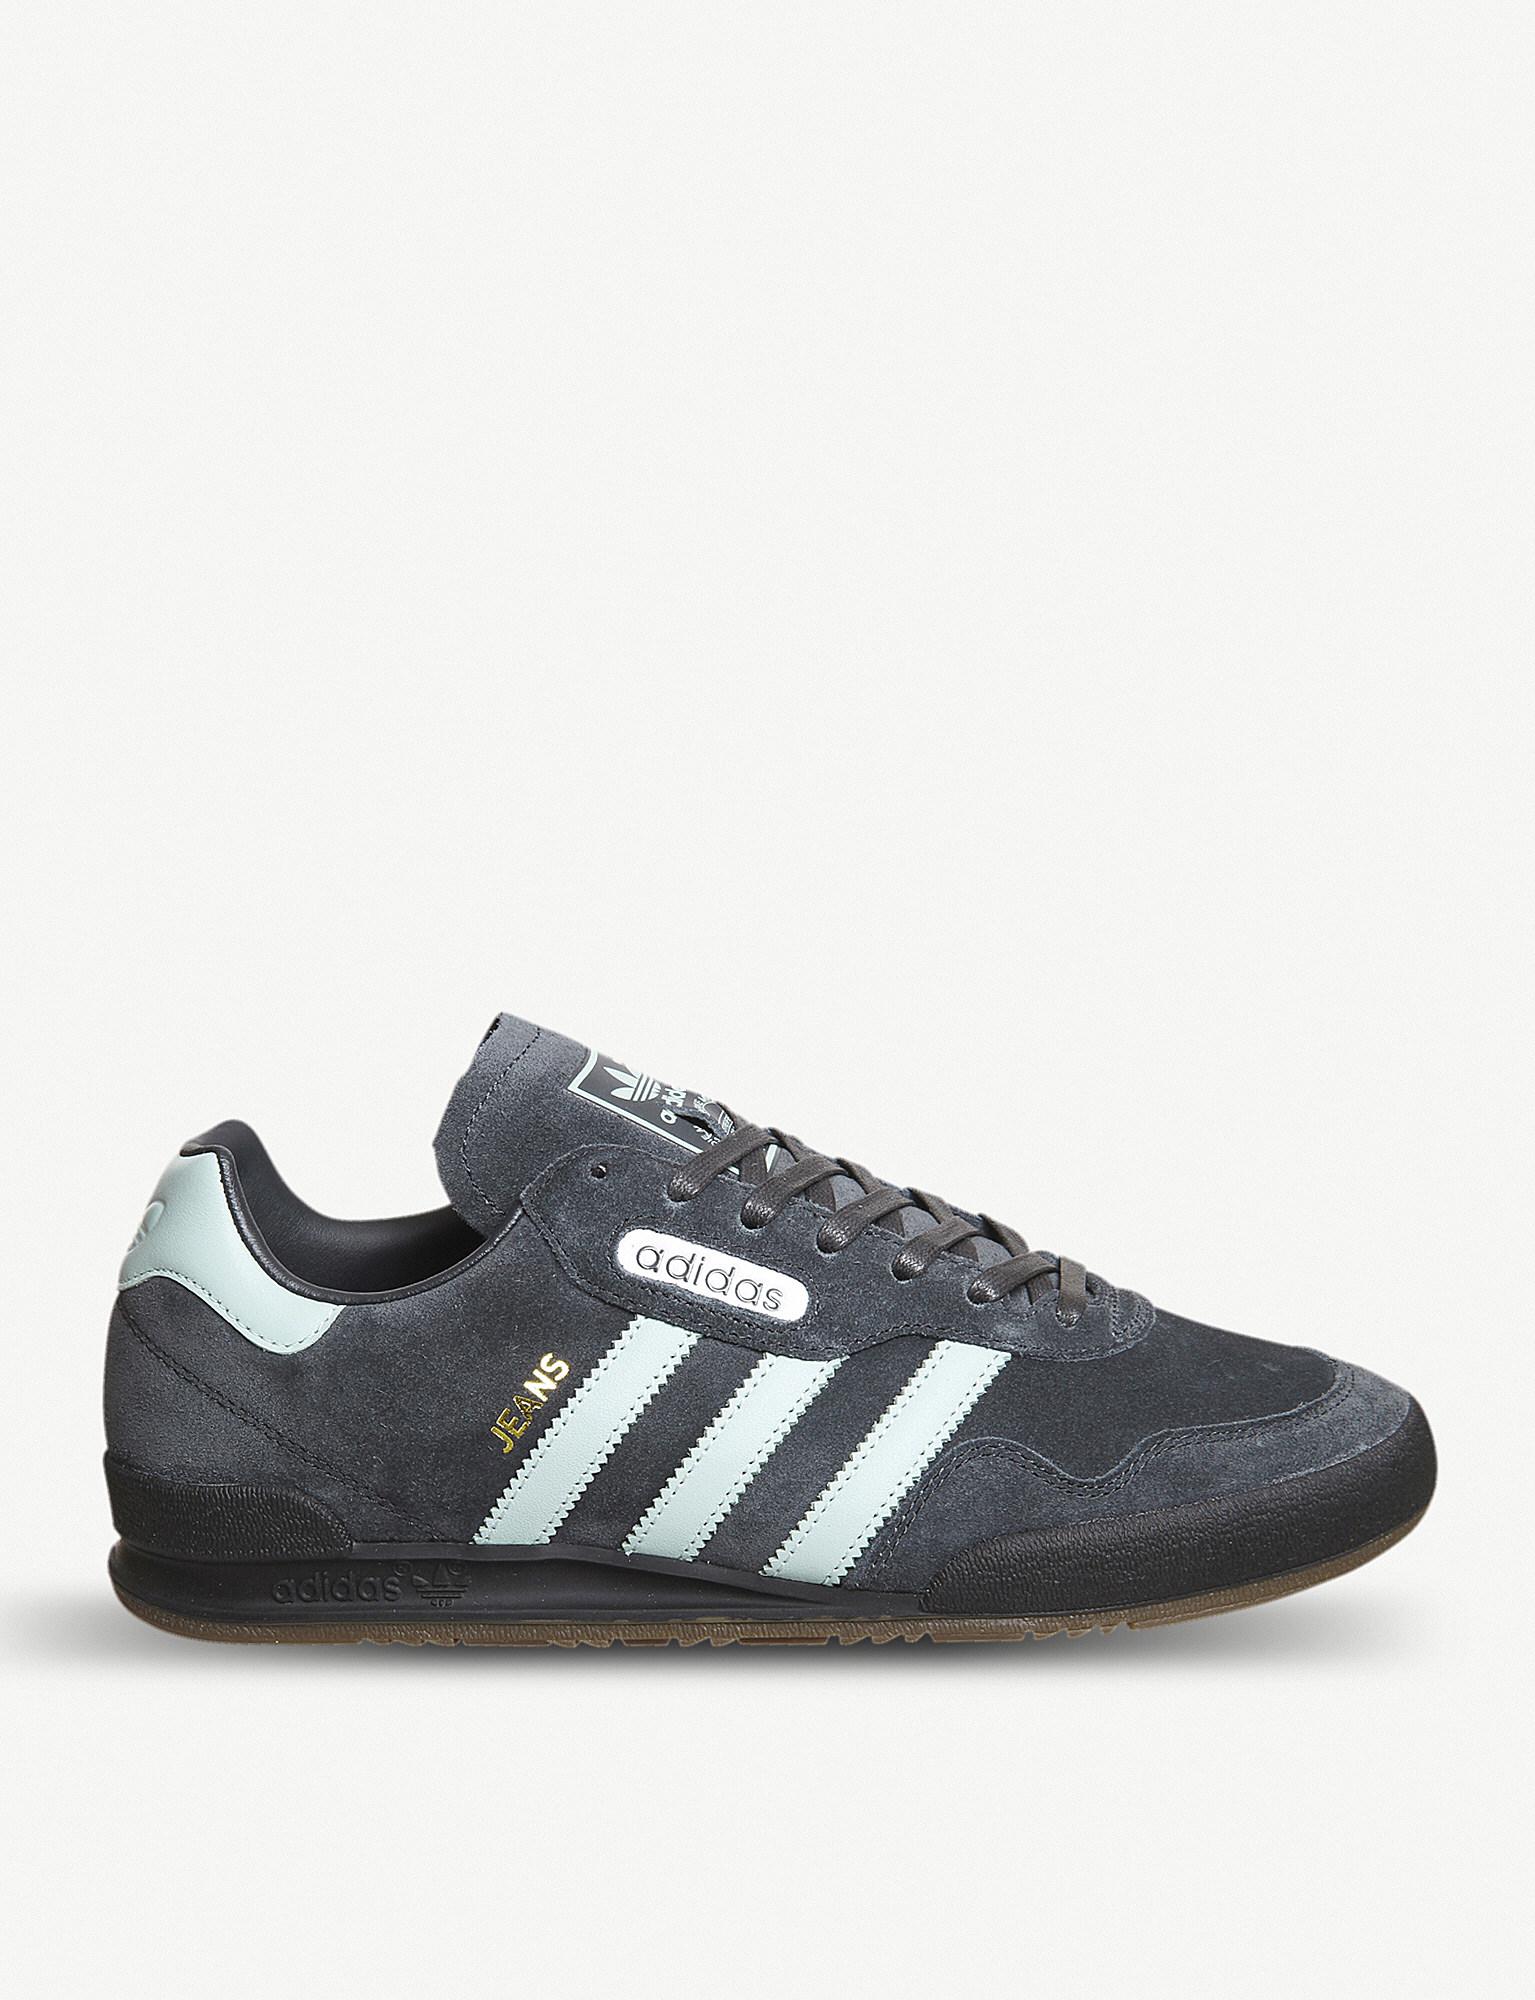 adidas jeans trainers carbon grey